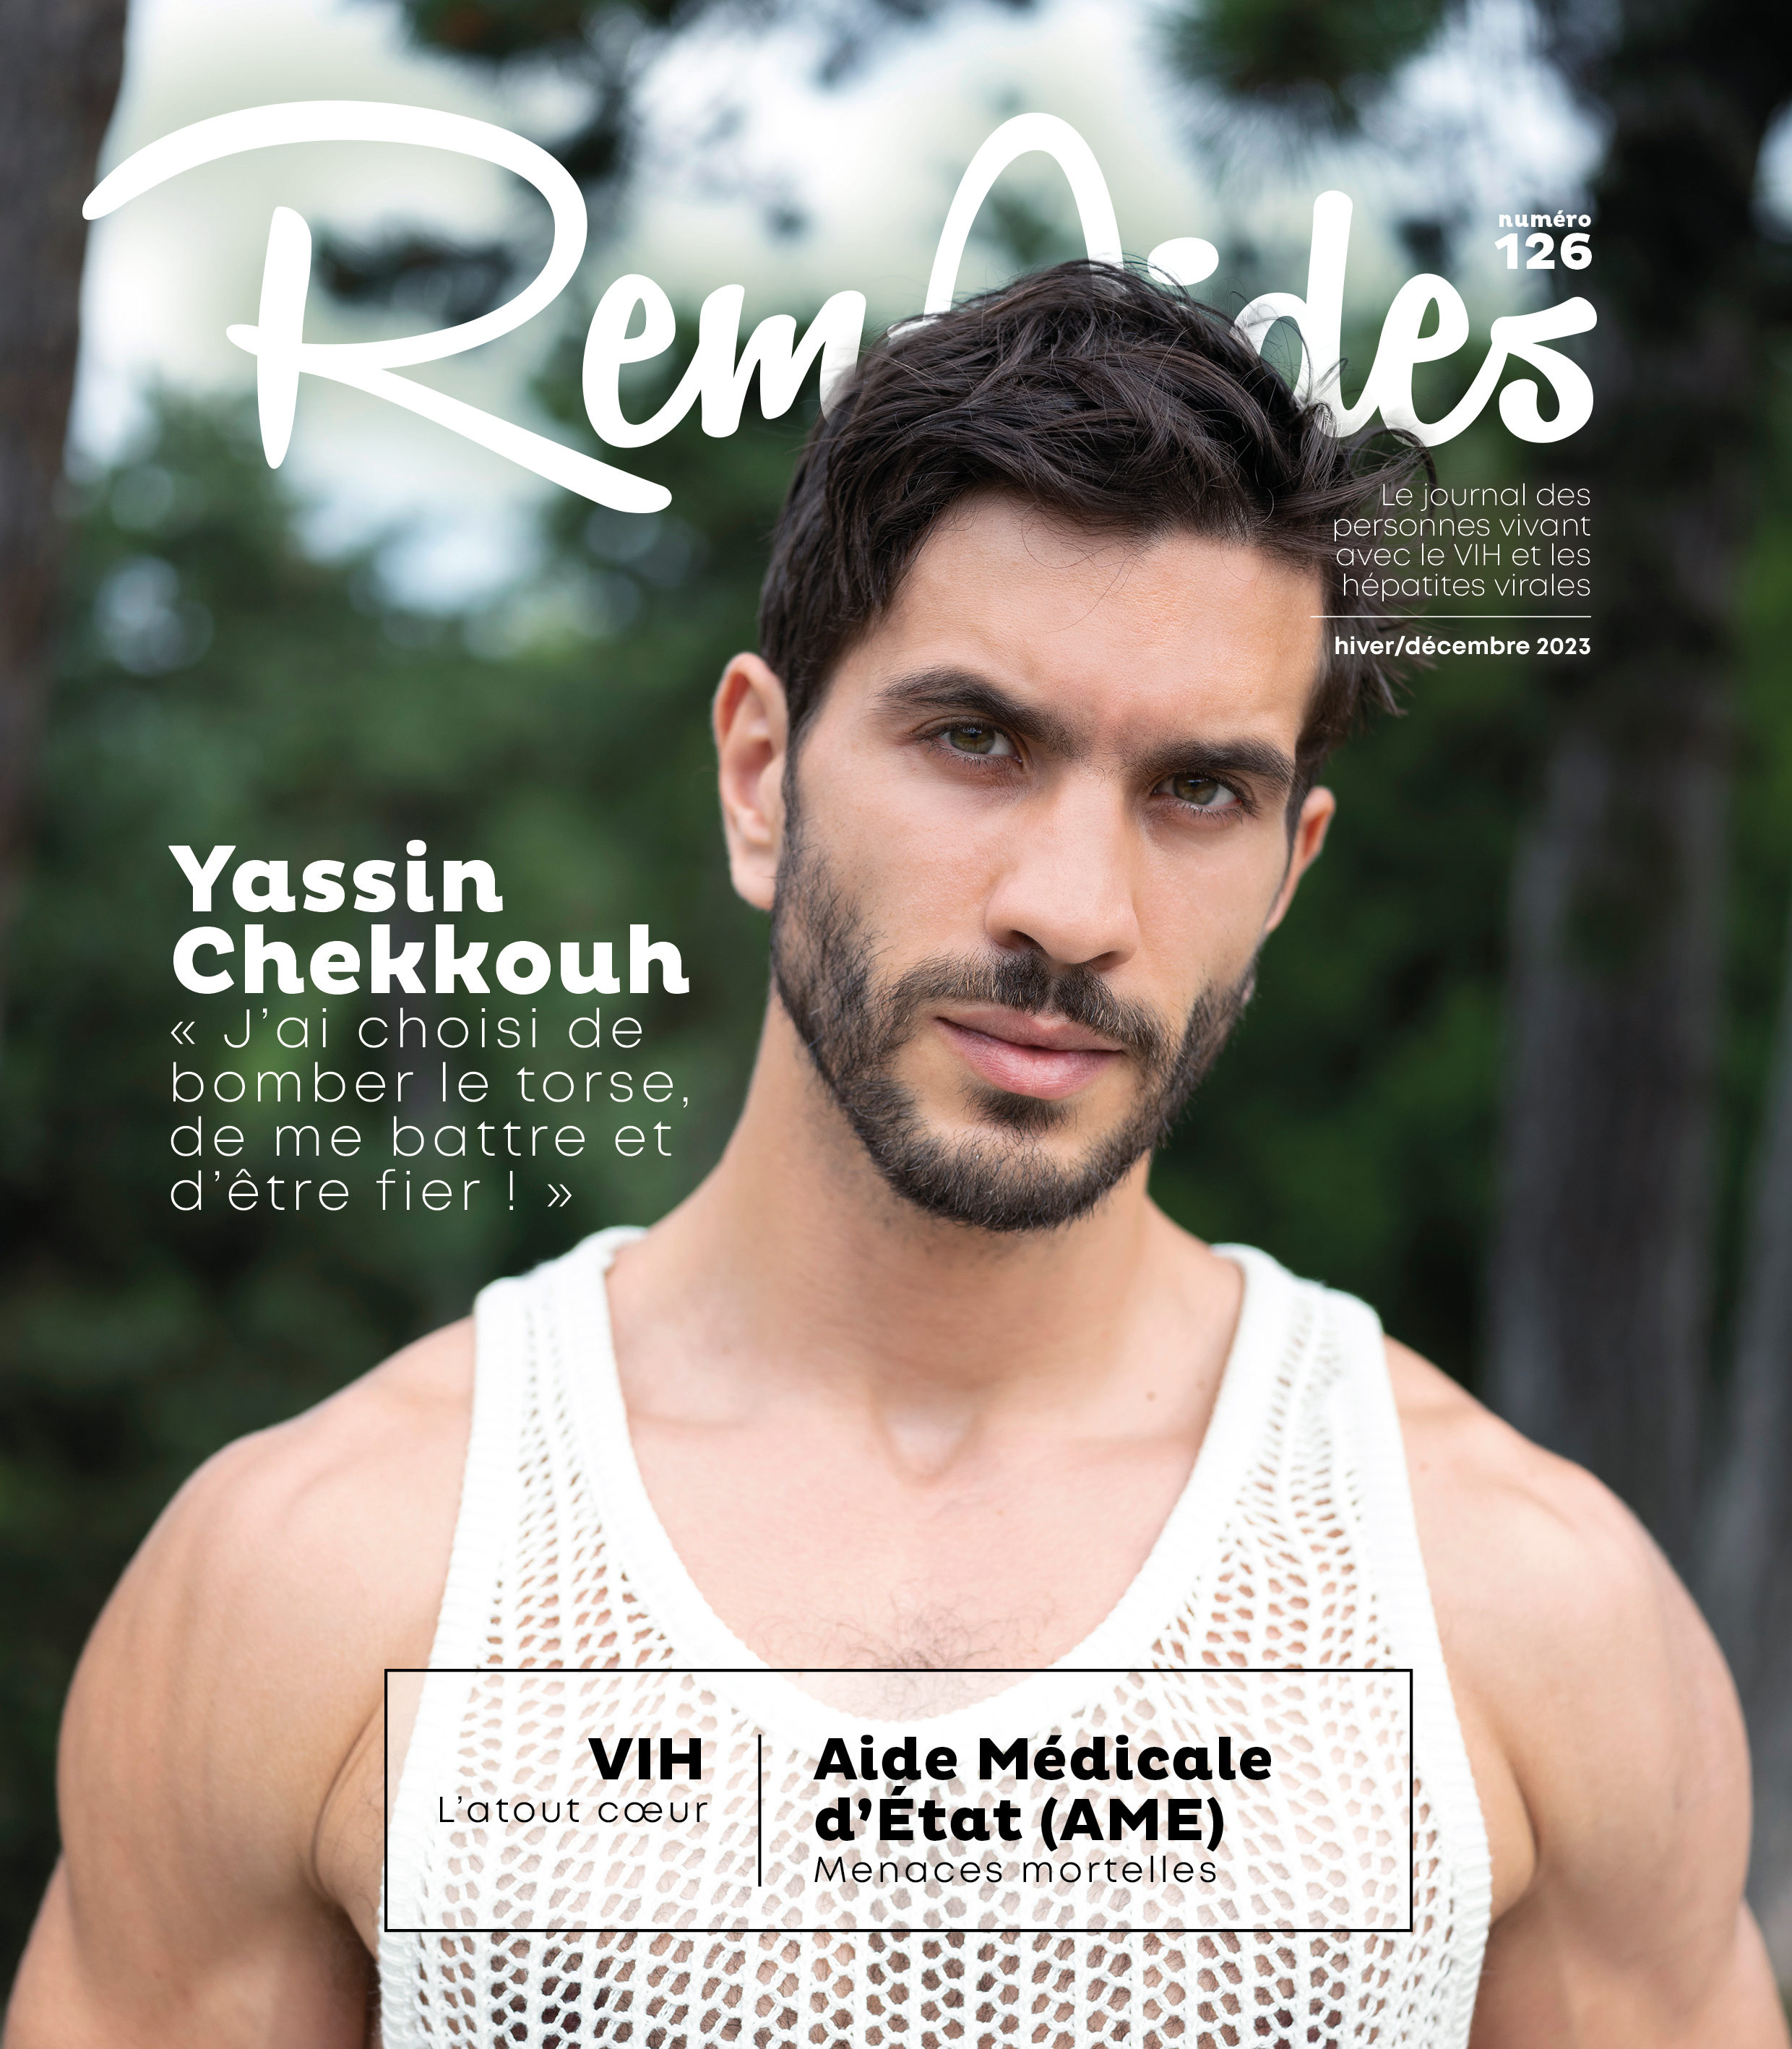 Yassin Chekkouh couverture Remaides 126